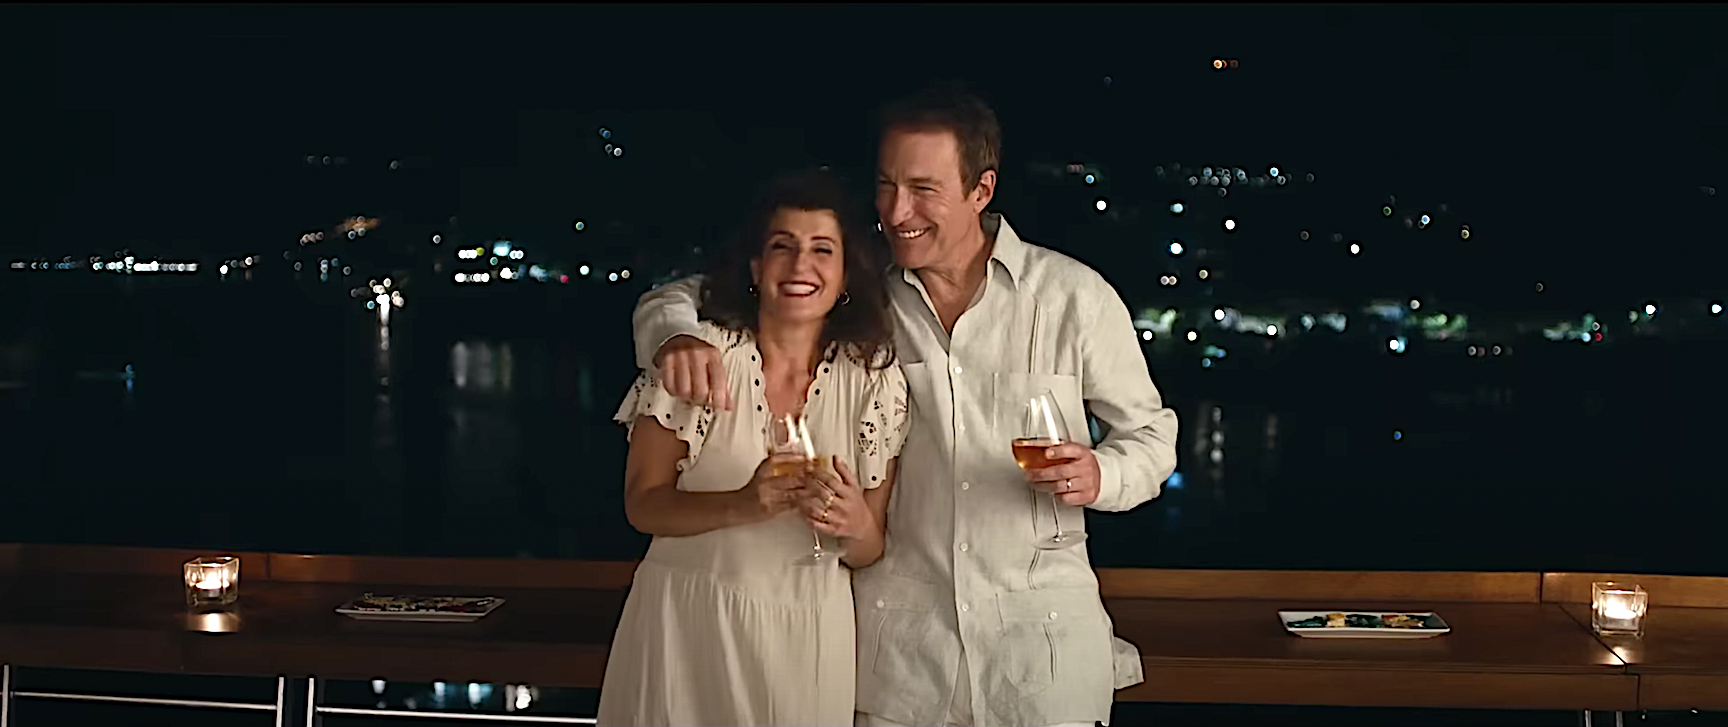 My Big Fat Greek Wedding 3 lands low Rotten Tomatoes score after first reviews photo